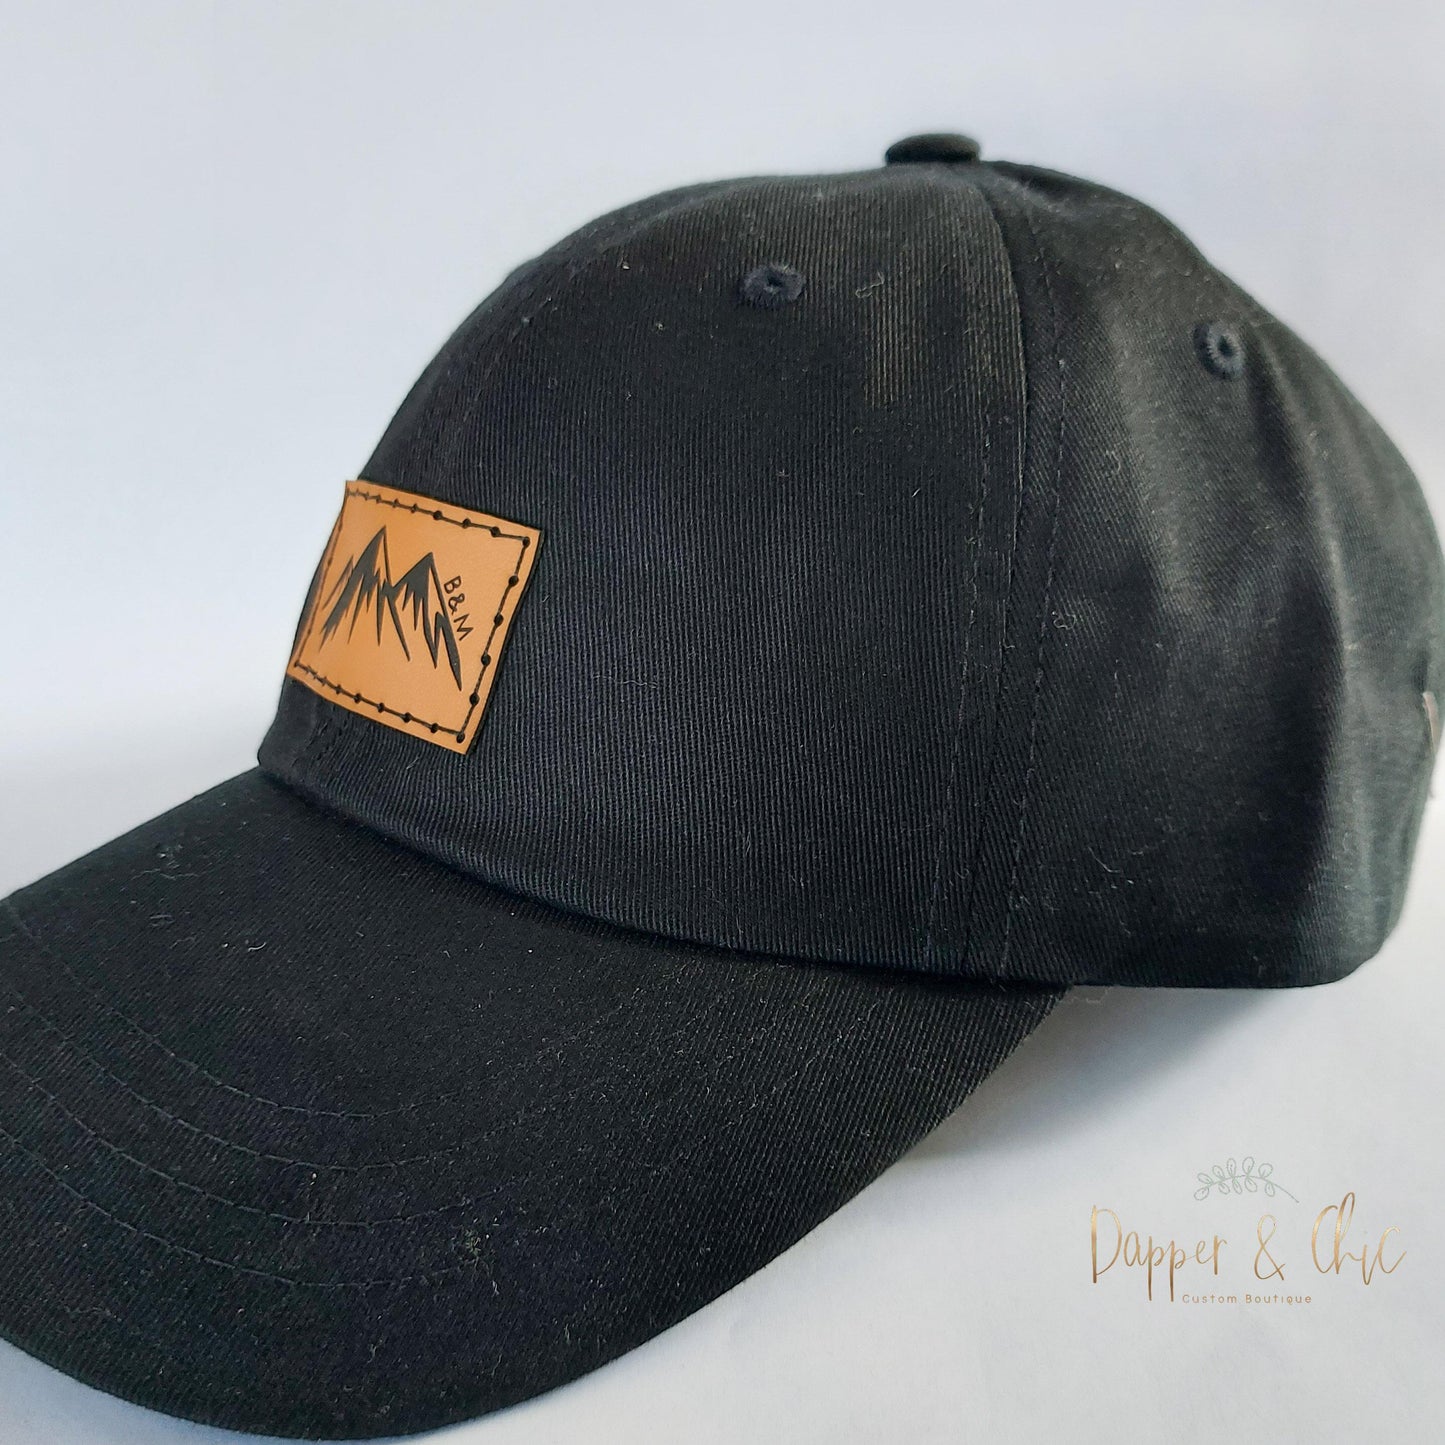 Dad/Mom style hat